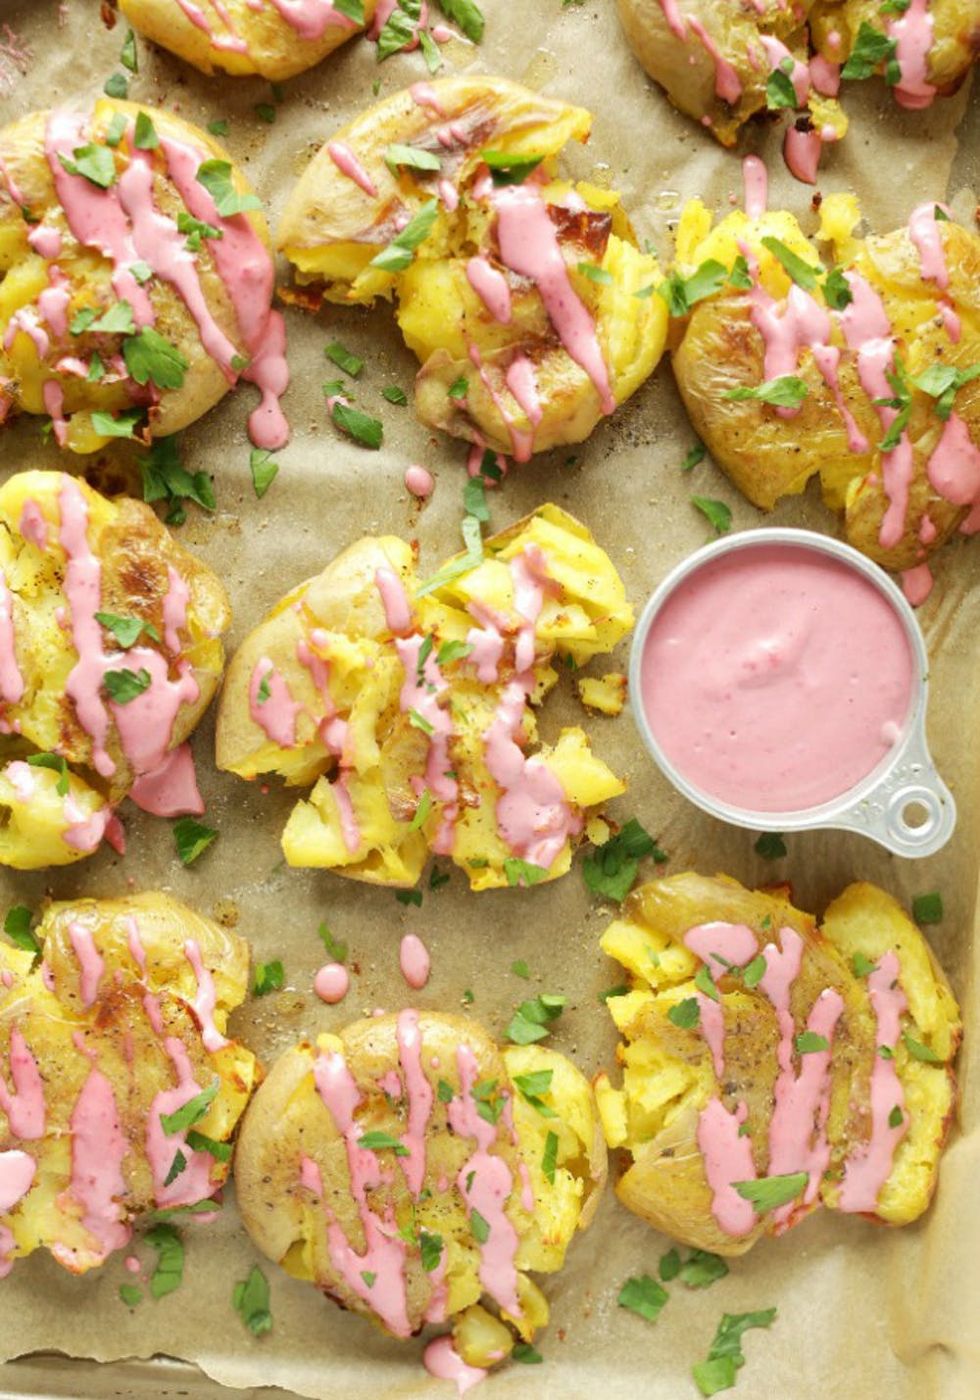 13 Smashed Potato Recipes That Make a *Perf* Spring BBQ Side - Brit + Co